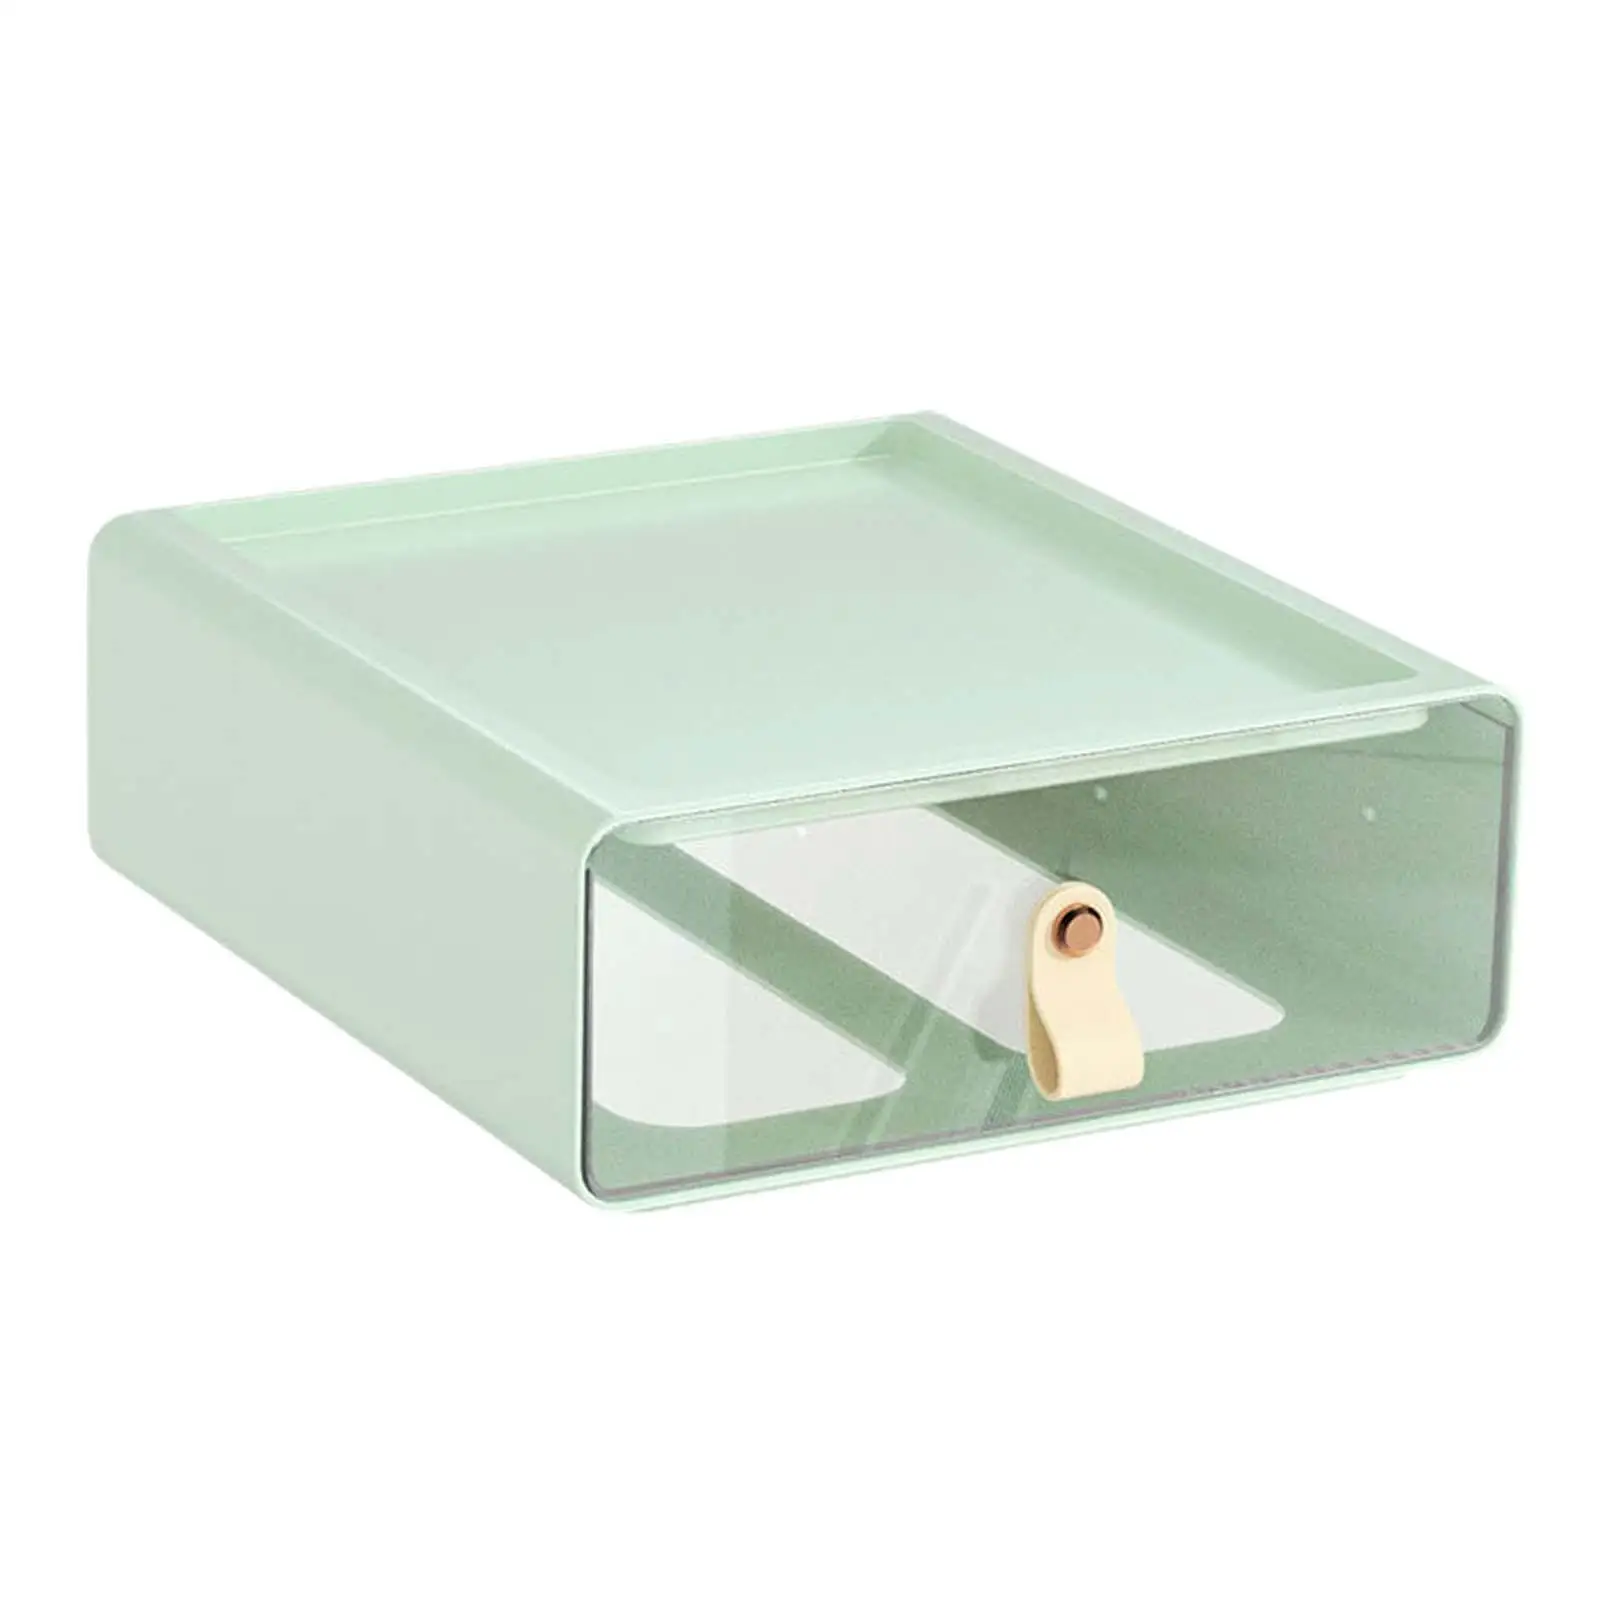 Desk Organizer Drawer Portable Multifunctional Large Capacity Accessories Desktop Stationery Organizer for Office Home Bathroom